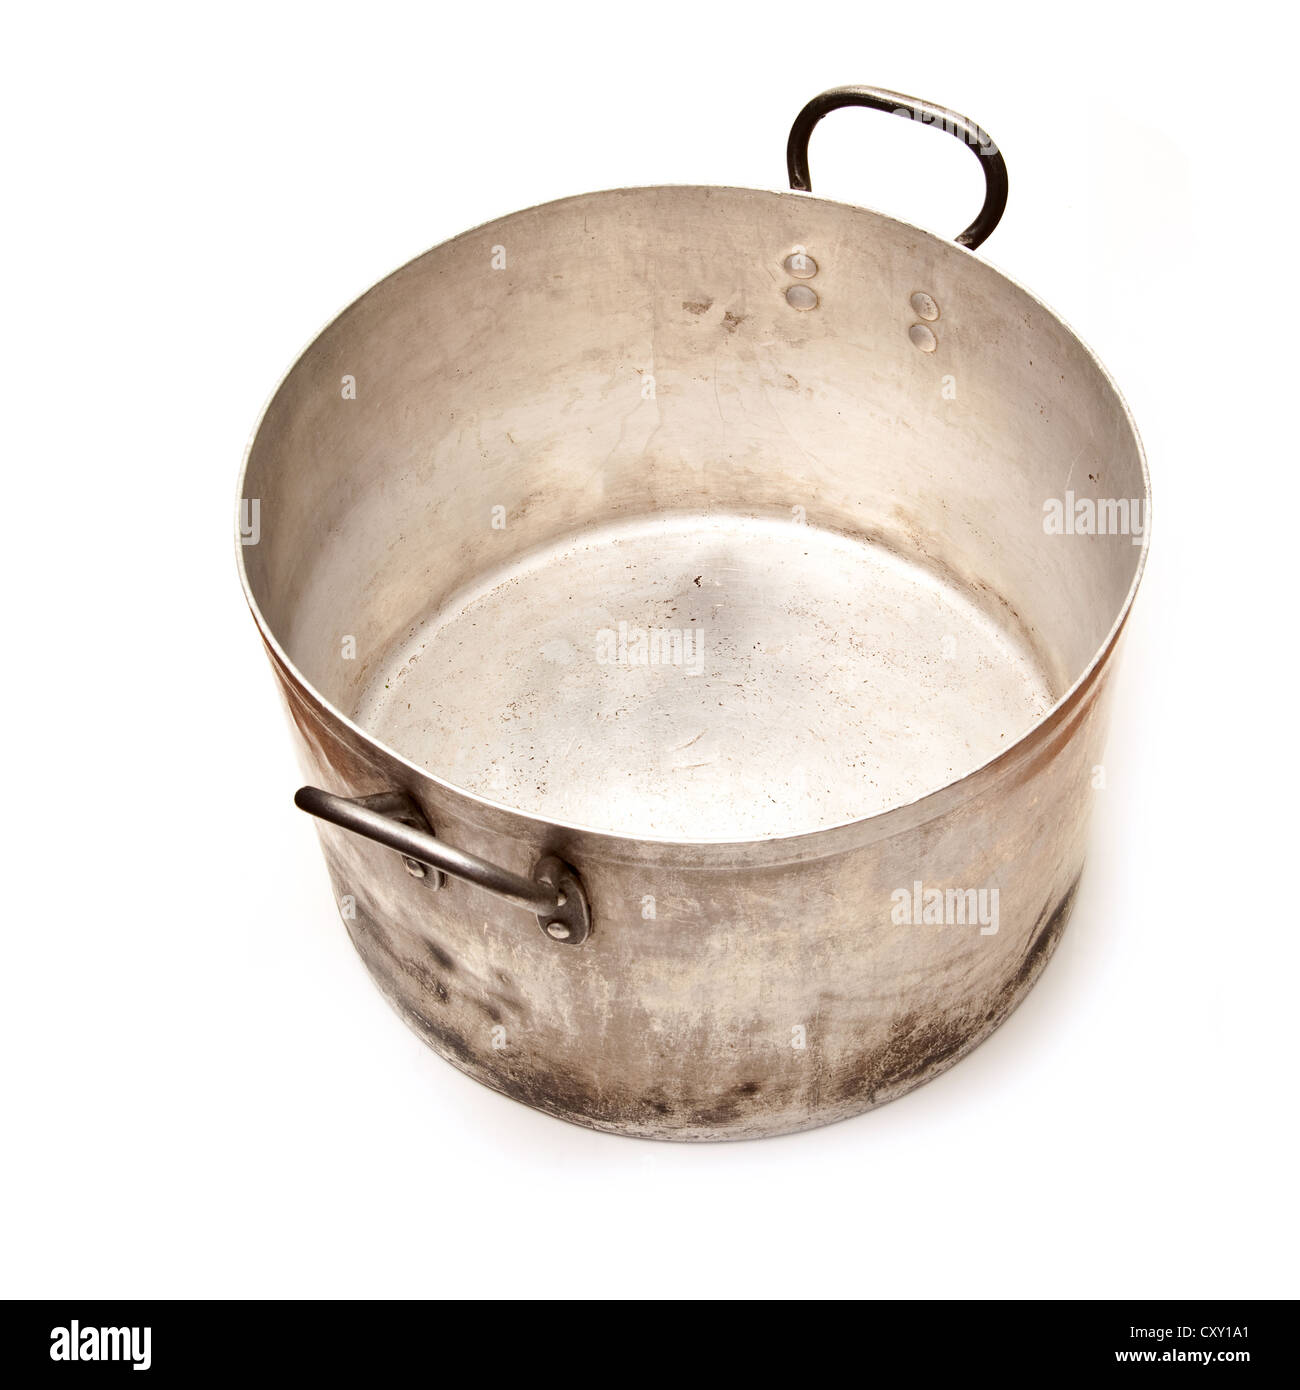 https://c8.alamy.com/comp/CXY1A1/large-metal-saucepan-cooking-pot-isolated-on-a-white-studio-background-CXY1A1.jpg